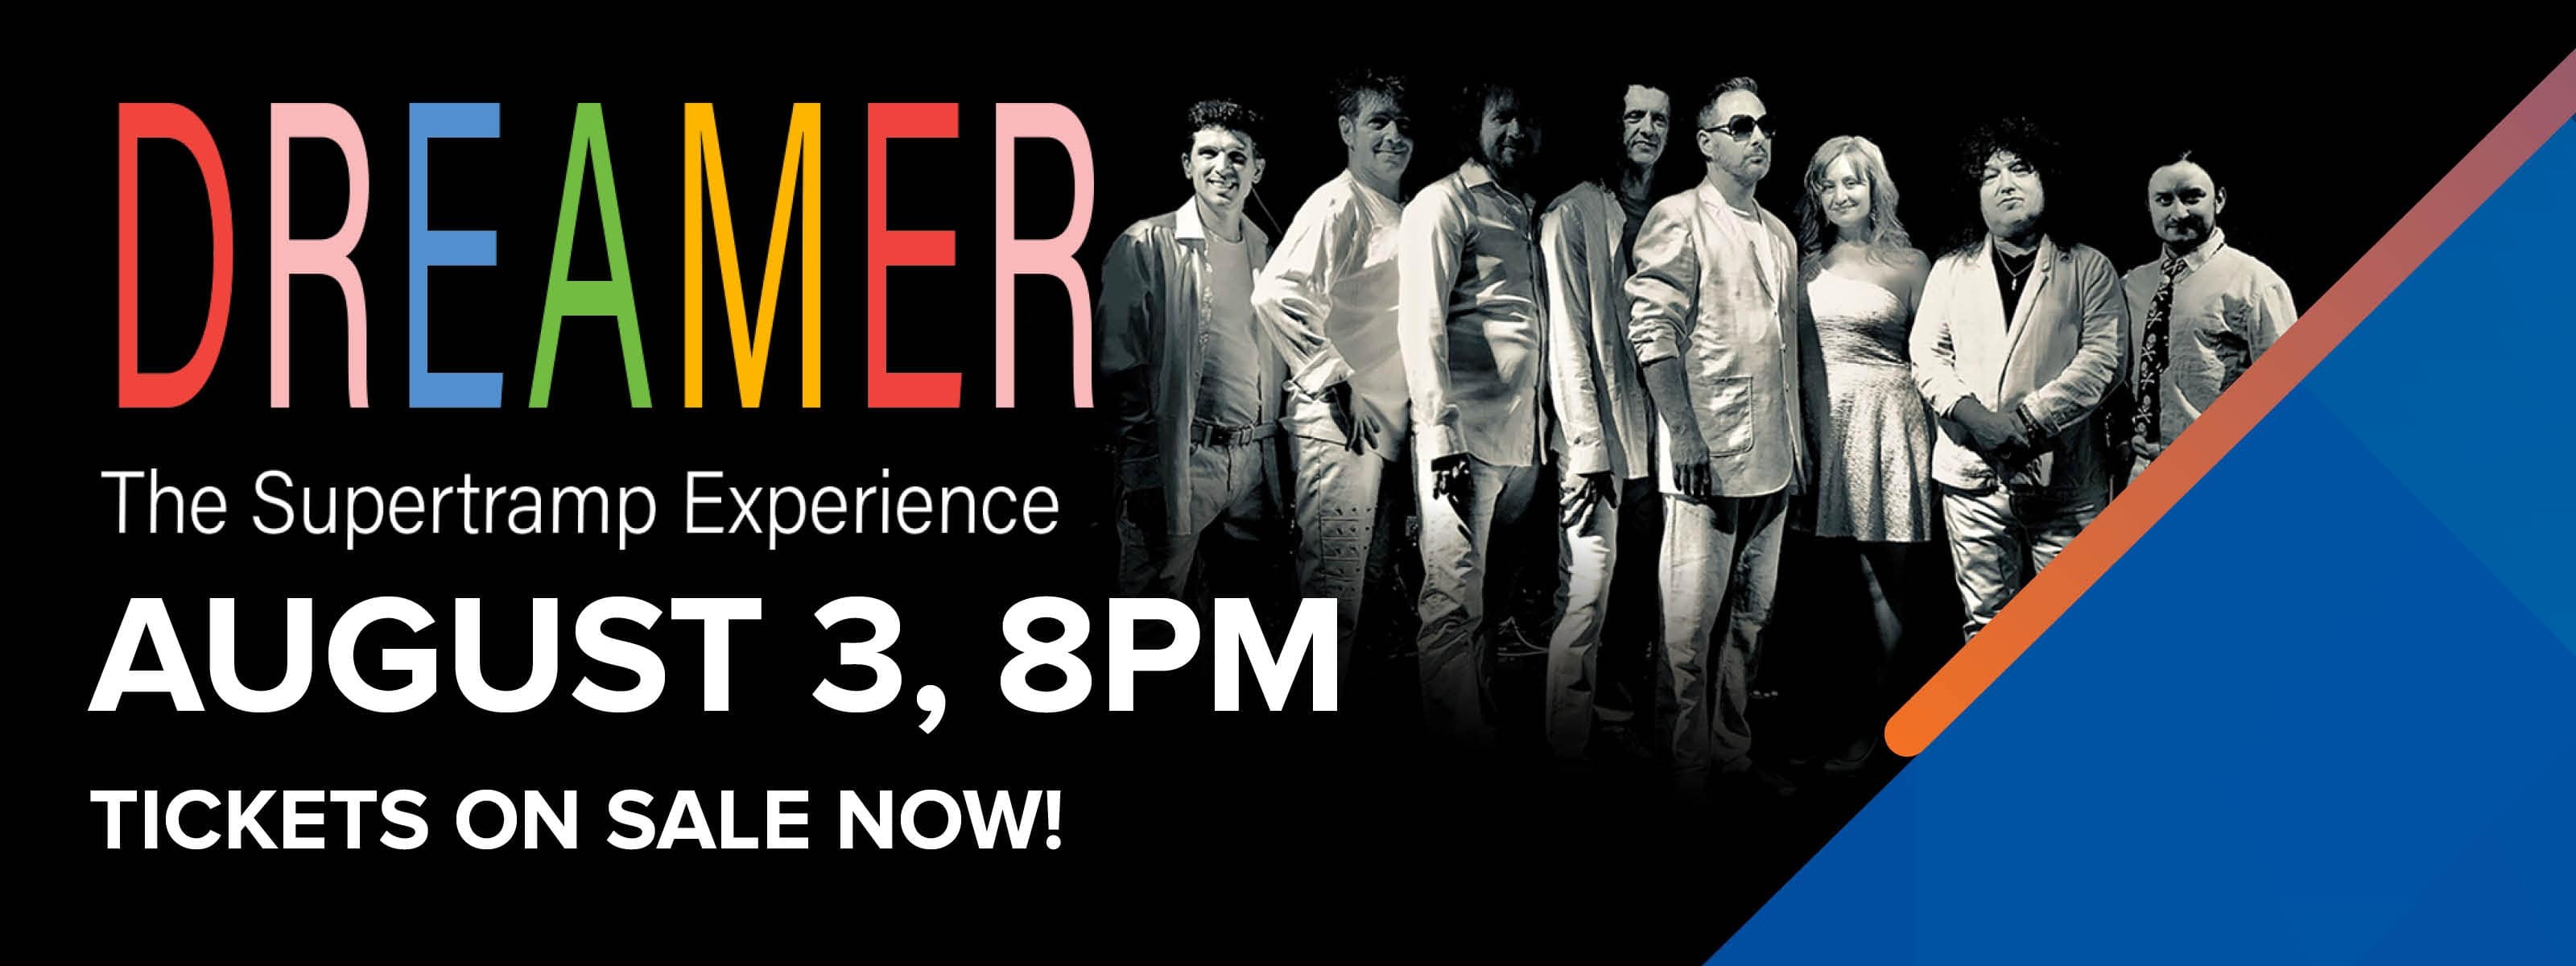 Dreamer The Supertramp Experience - August 3, 8pm. Tickets On Sale Now